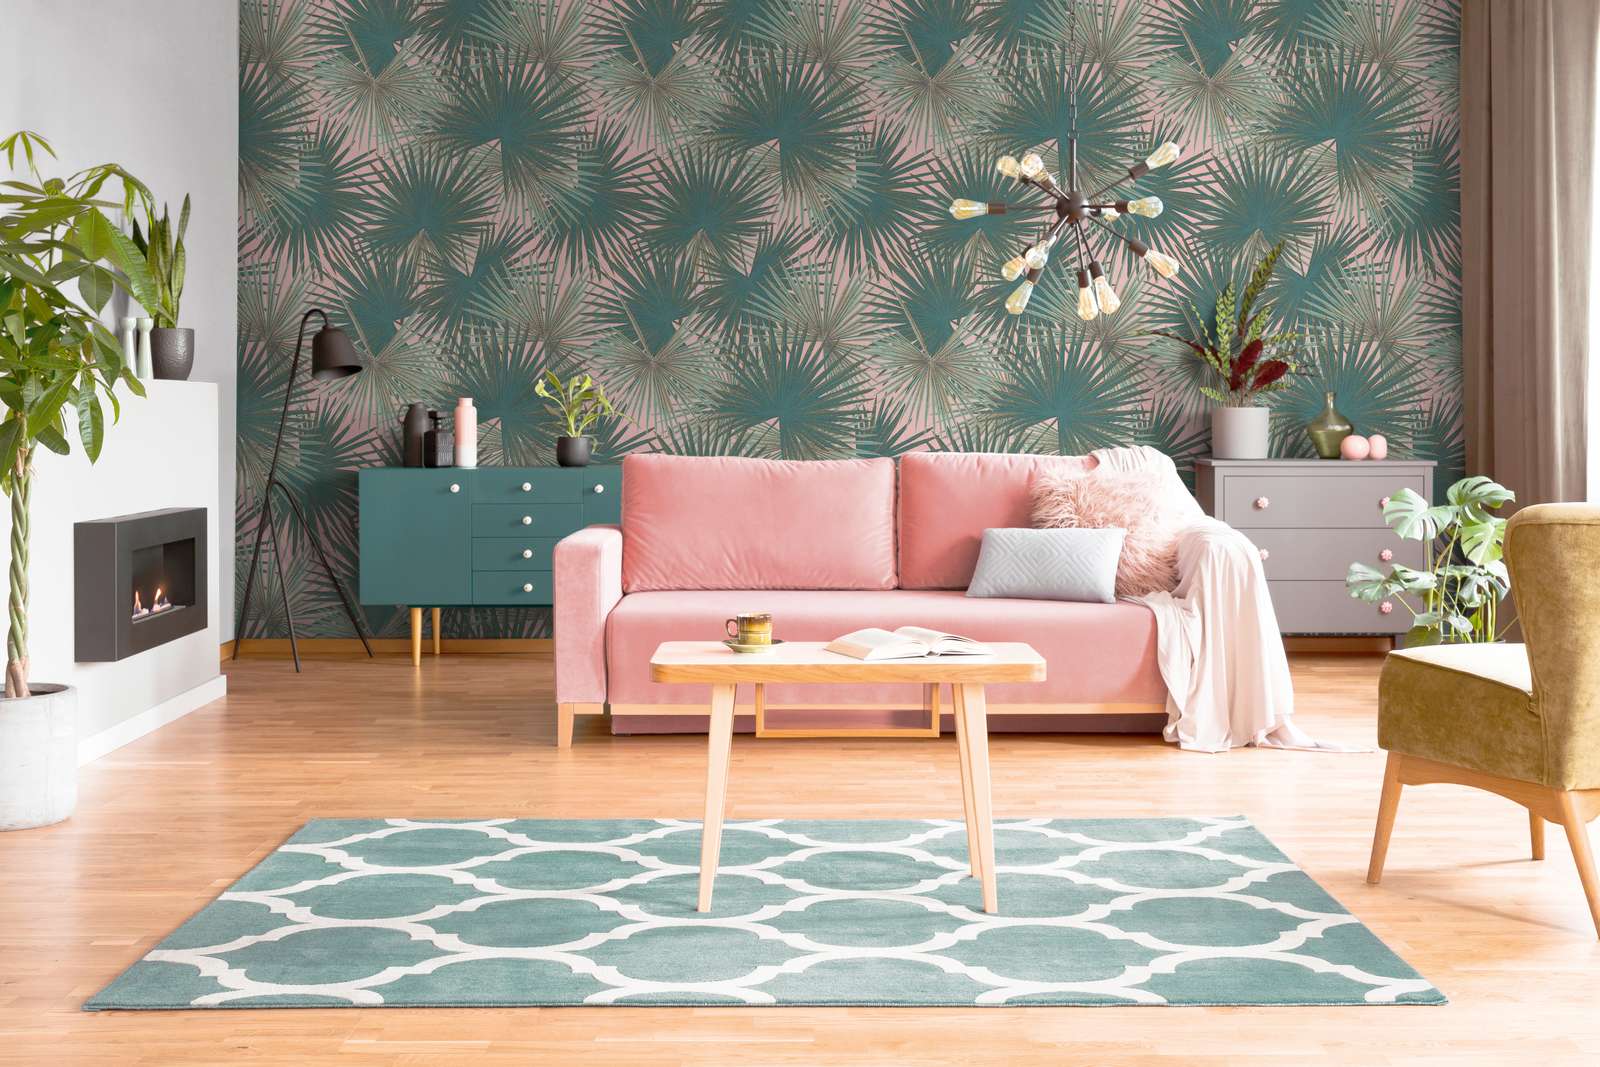             Leaf wallpaper with tropical plants - green, petrol, pink
        